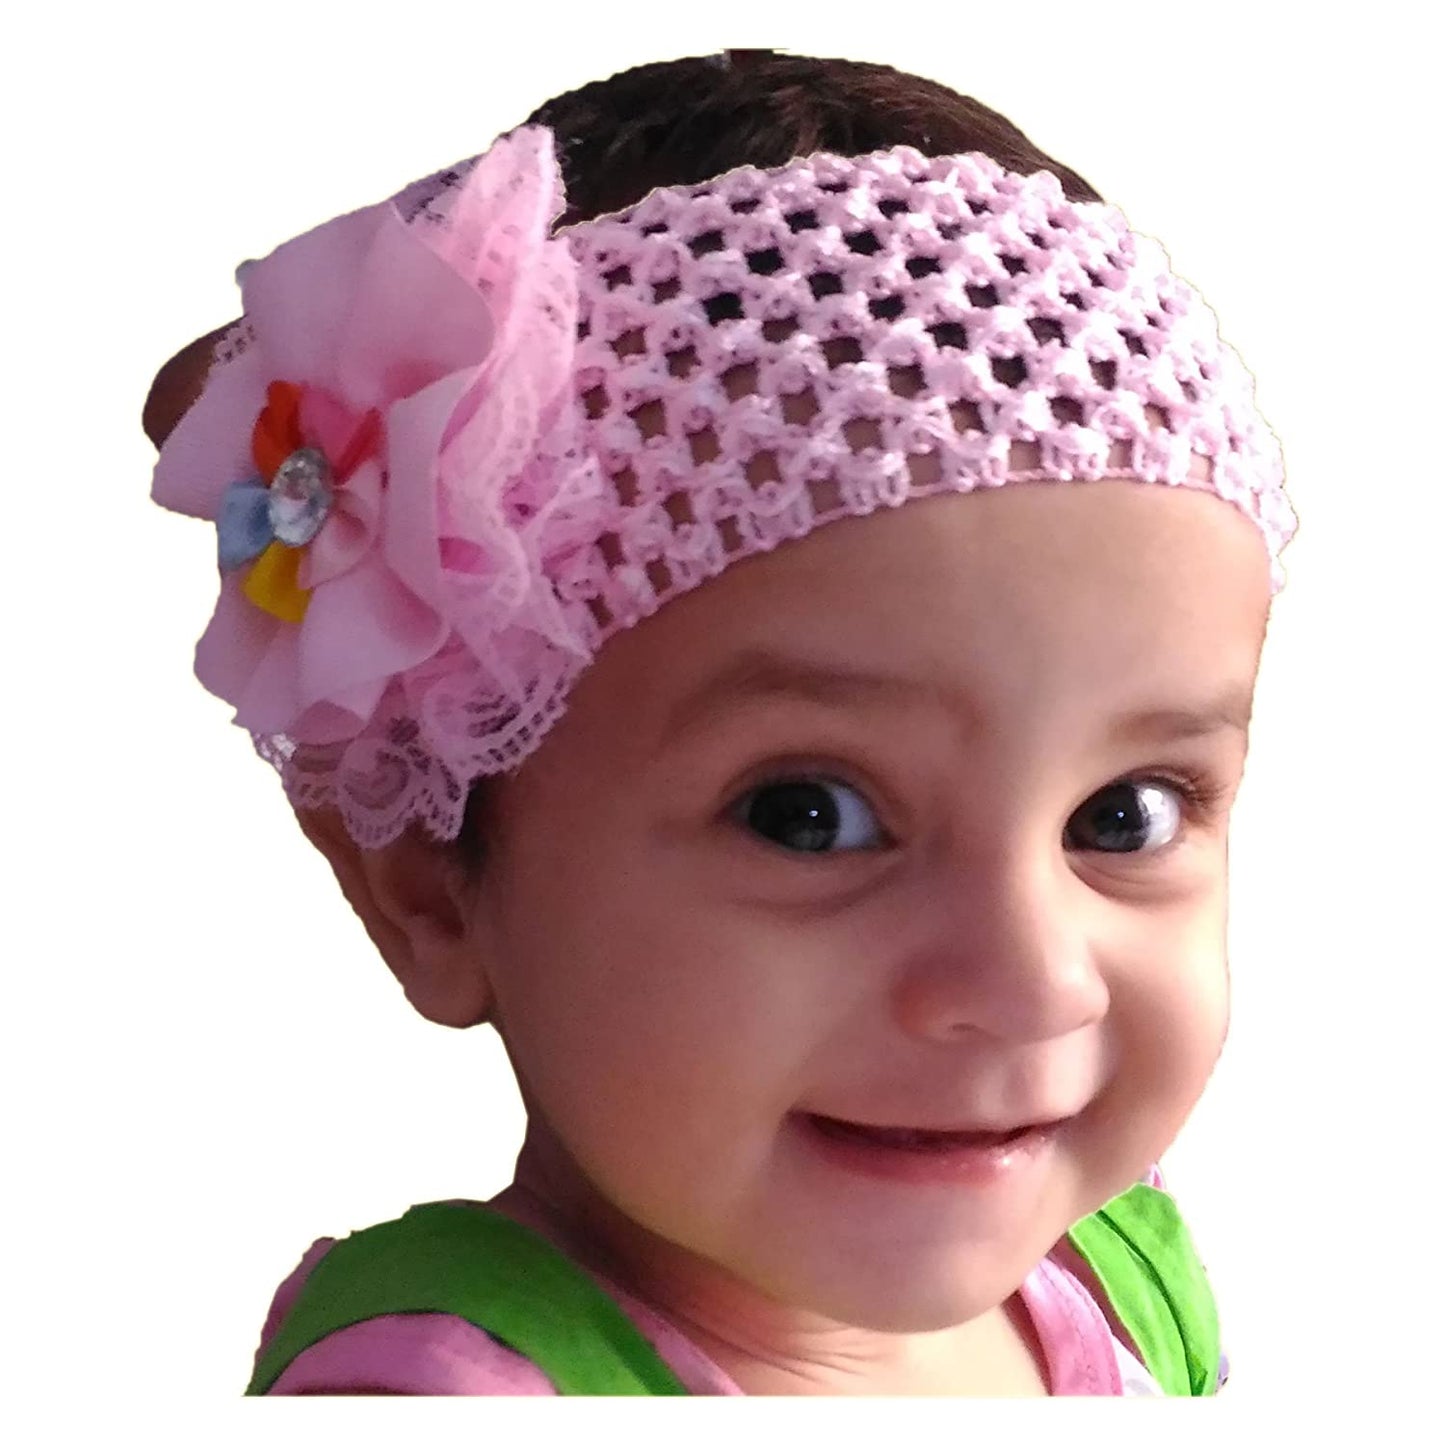 Floral Soft Stretchy Headbands for Baby Girls and Newborn (17-11 Red Baby Headband)